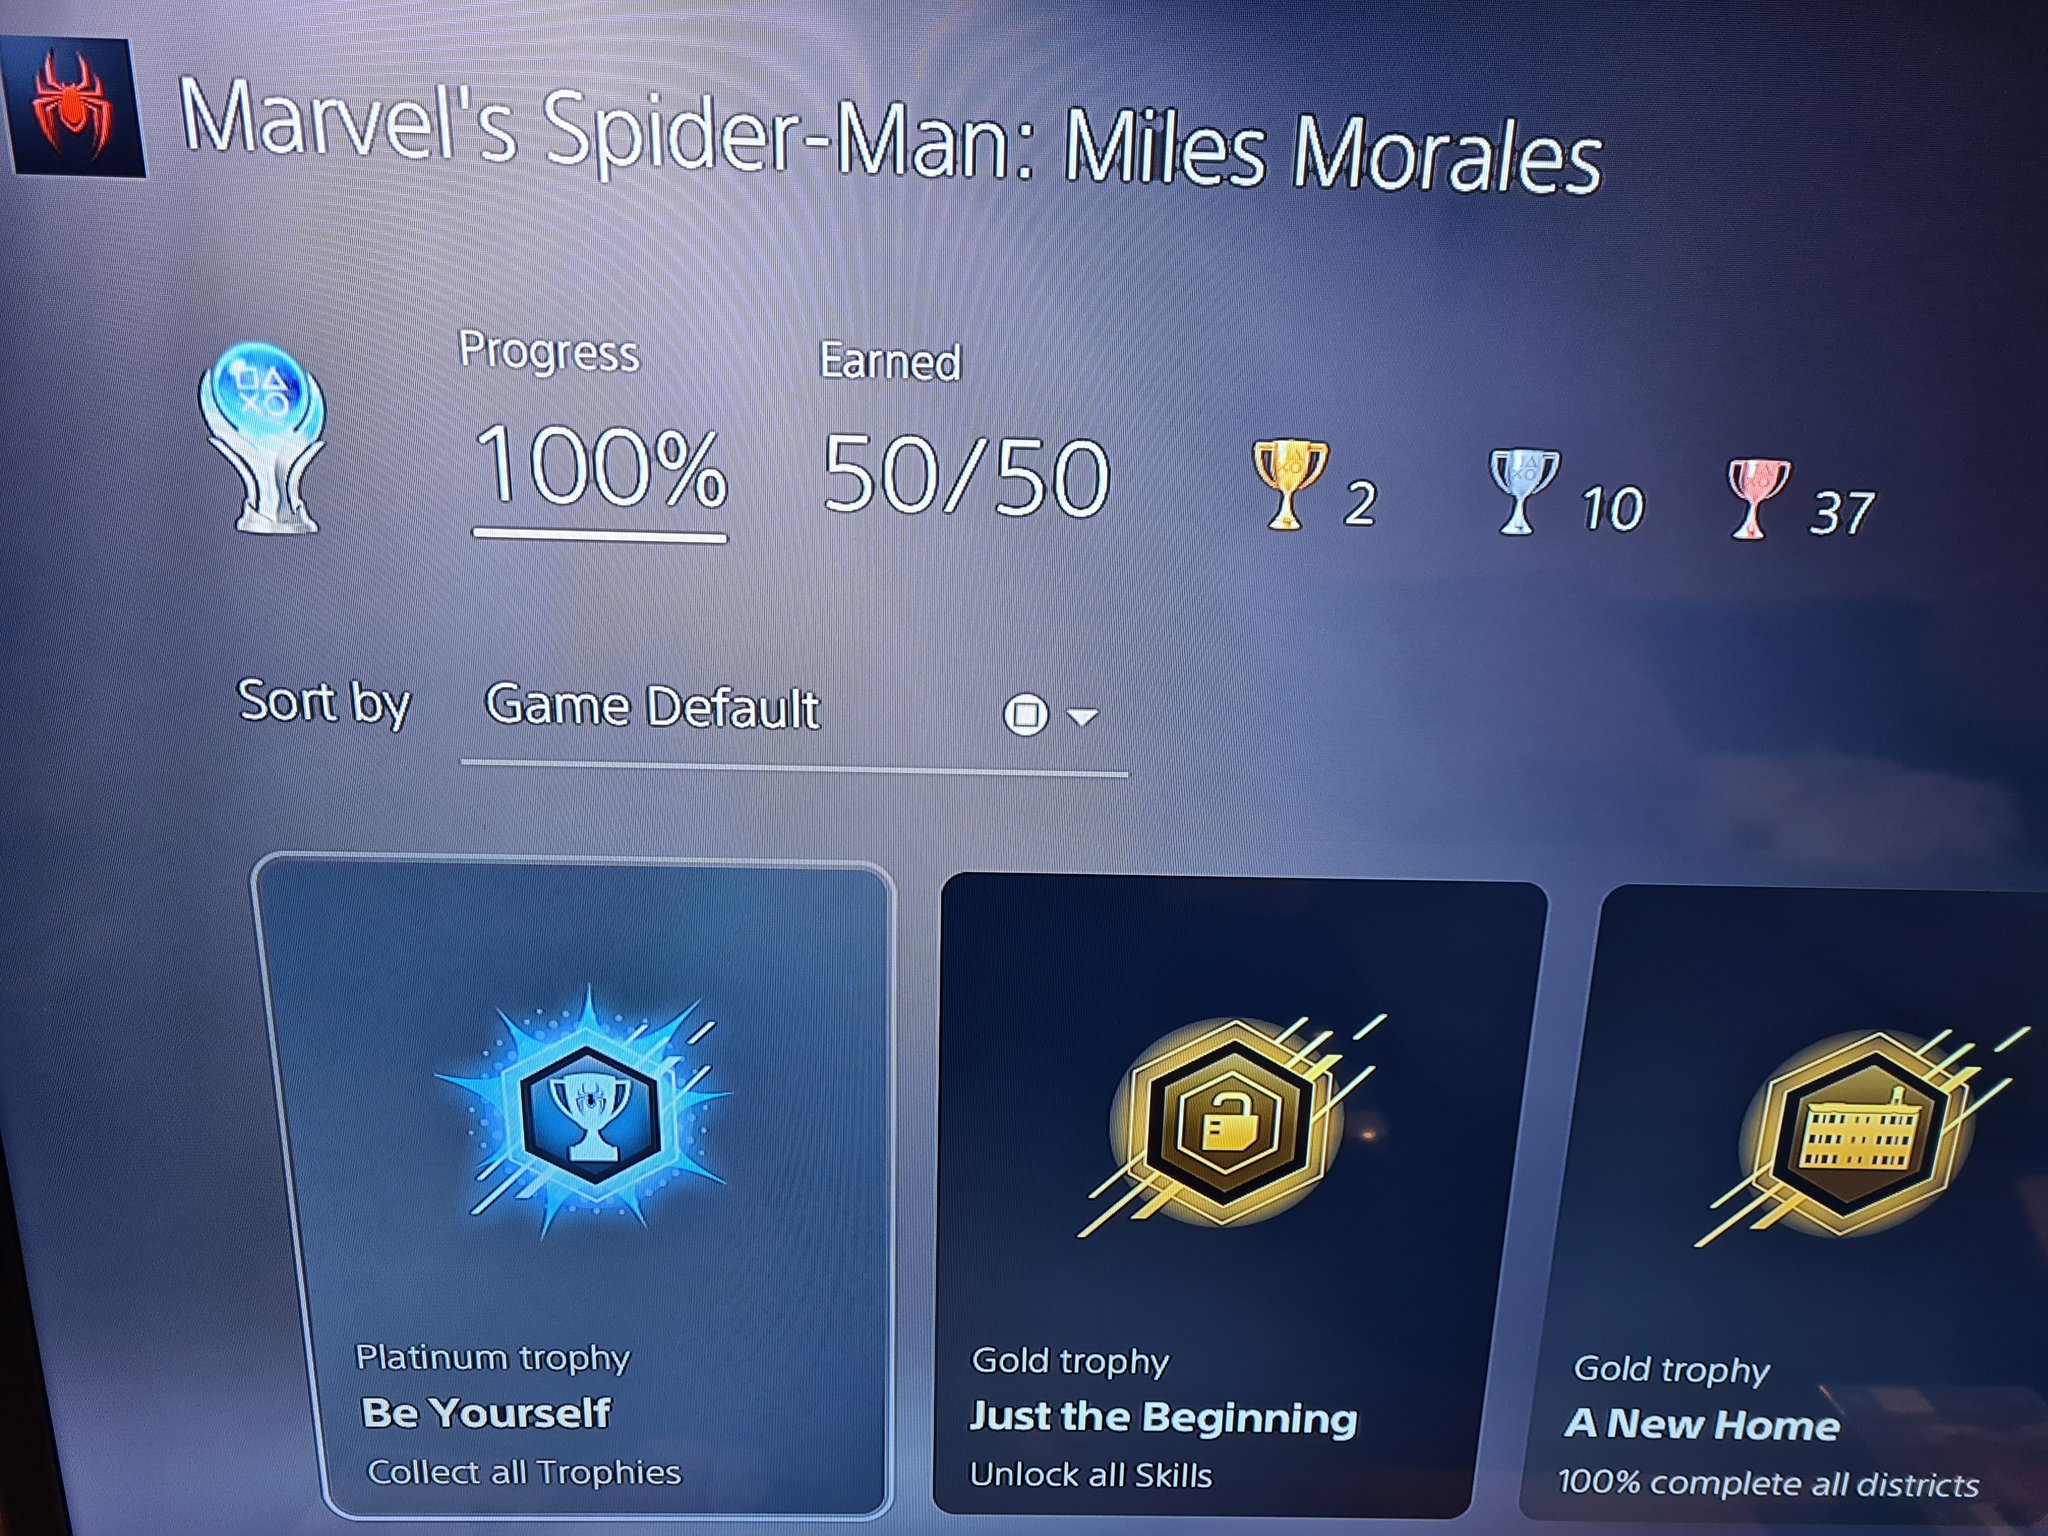 Spider-Man :- Be Greater Trophy 